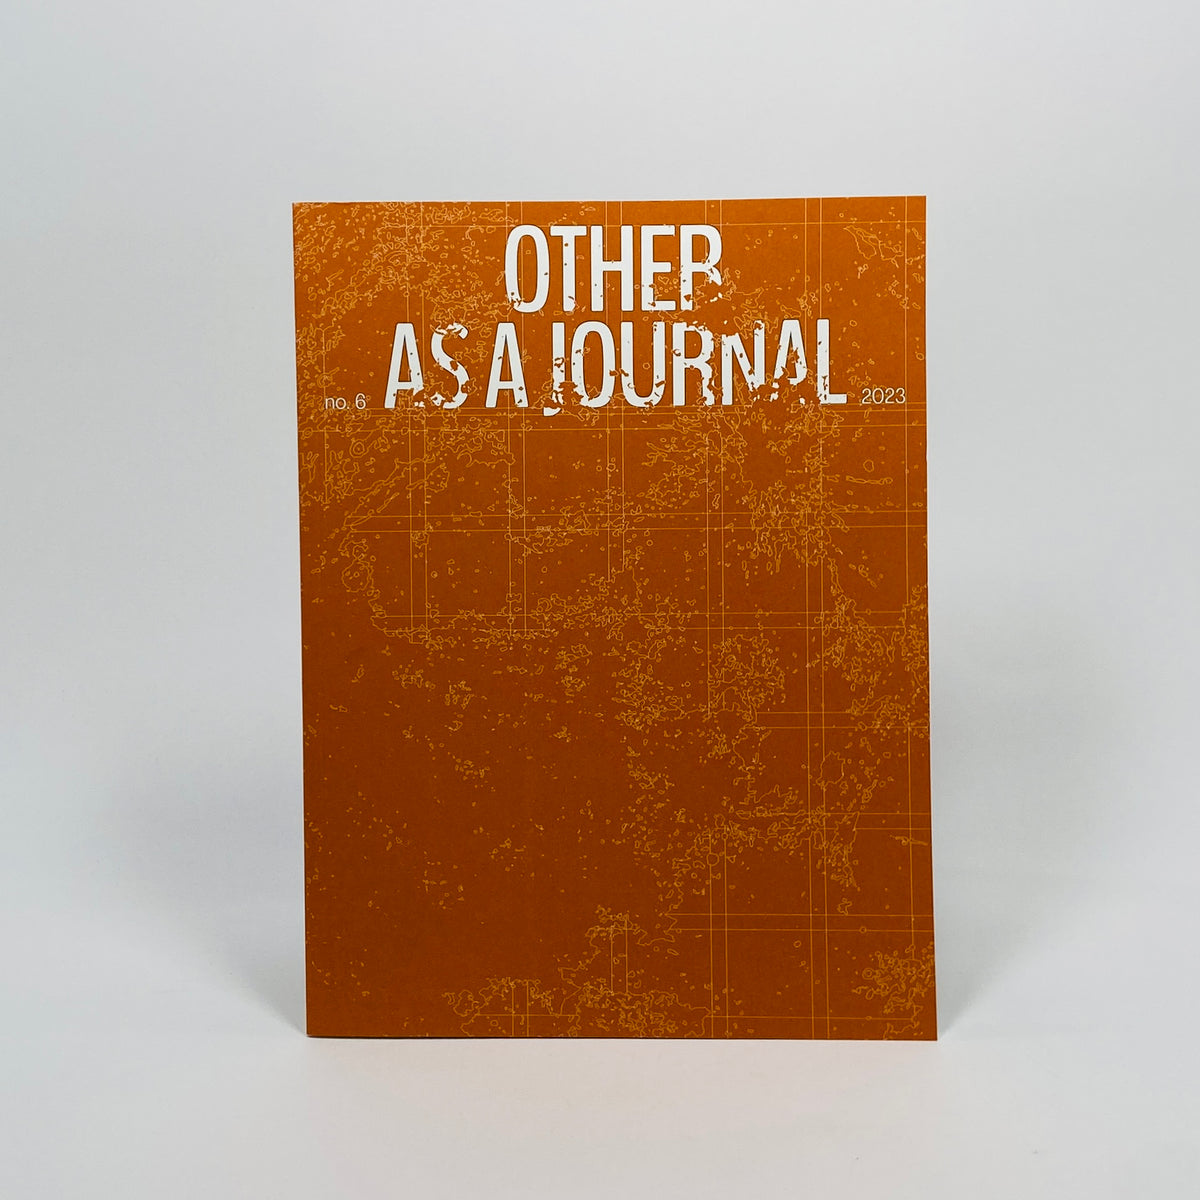 As A Journal #6 - Other